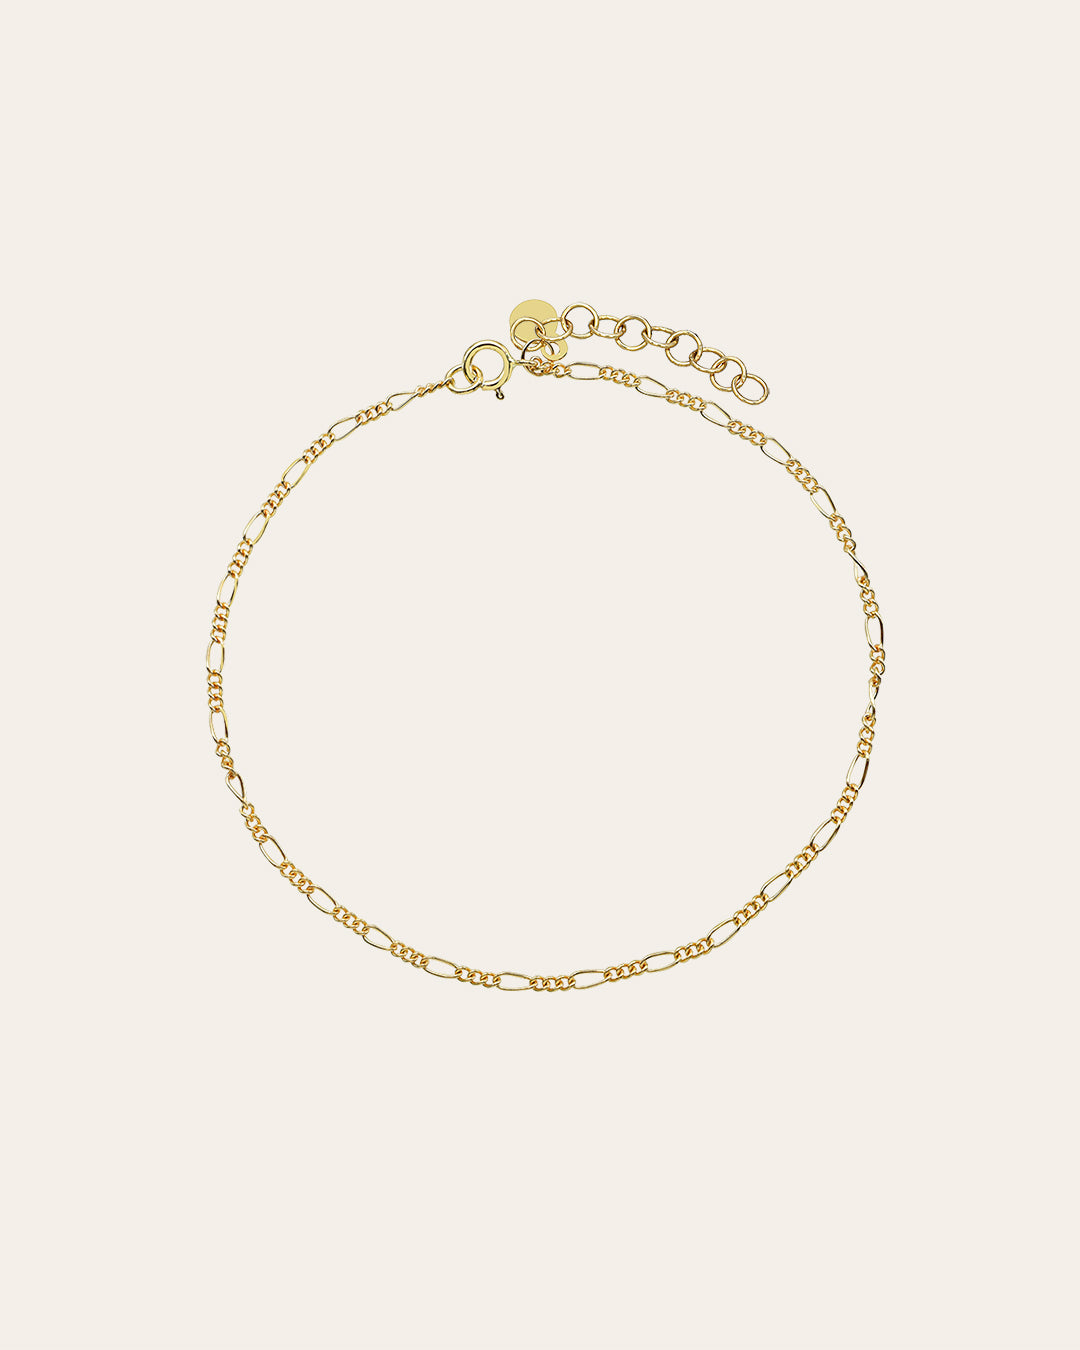 Permanent Jewelry | Poet and The Bench | Figaro Chain Bracelet 14K Yellow / 6.5